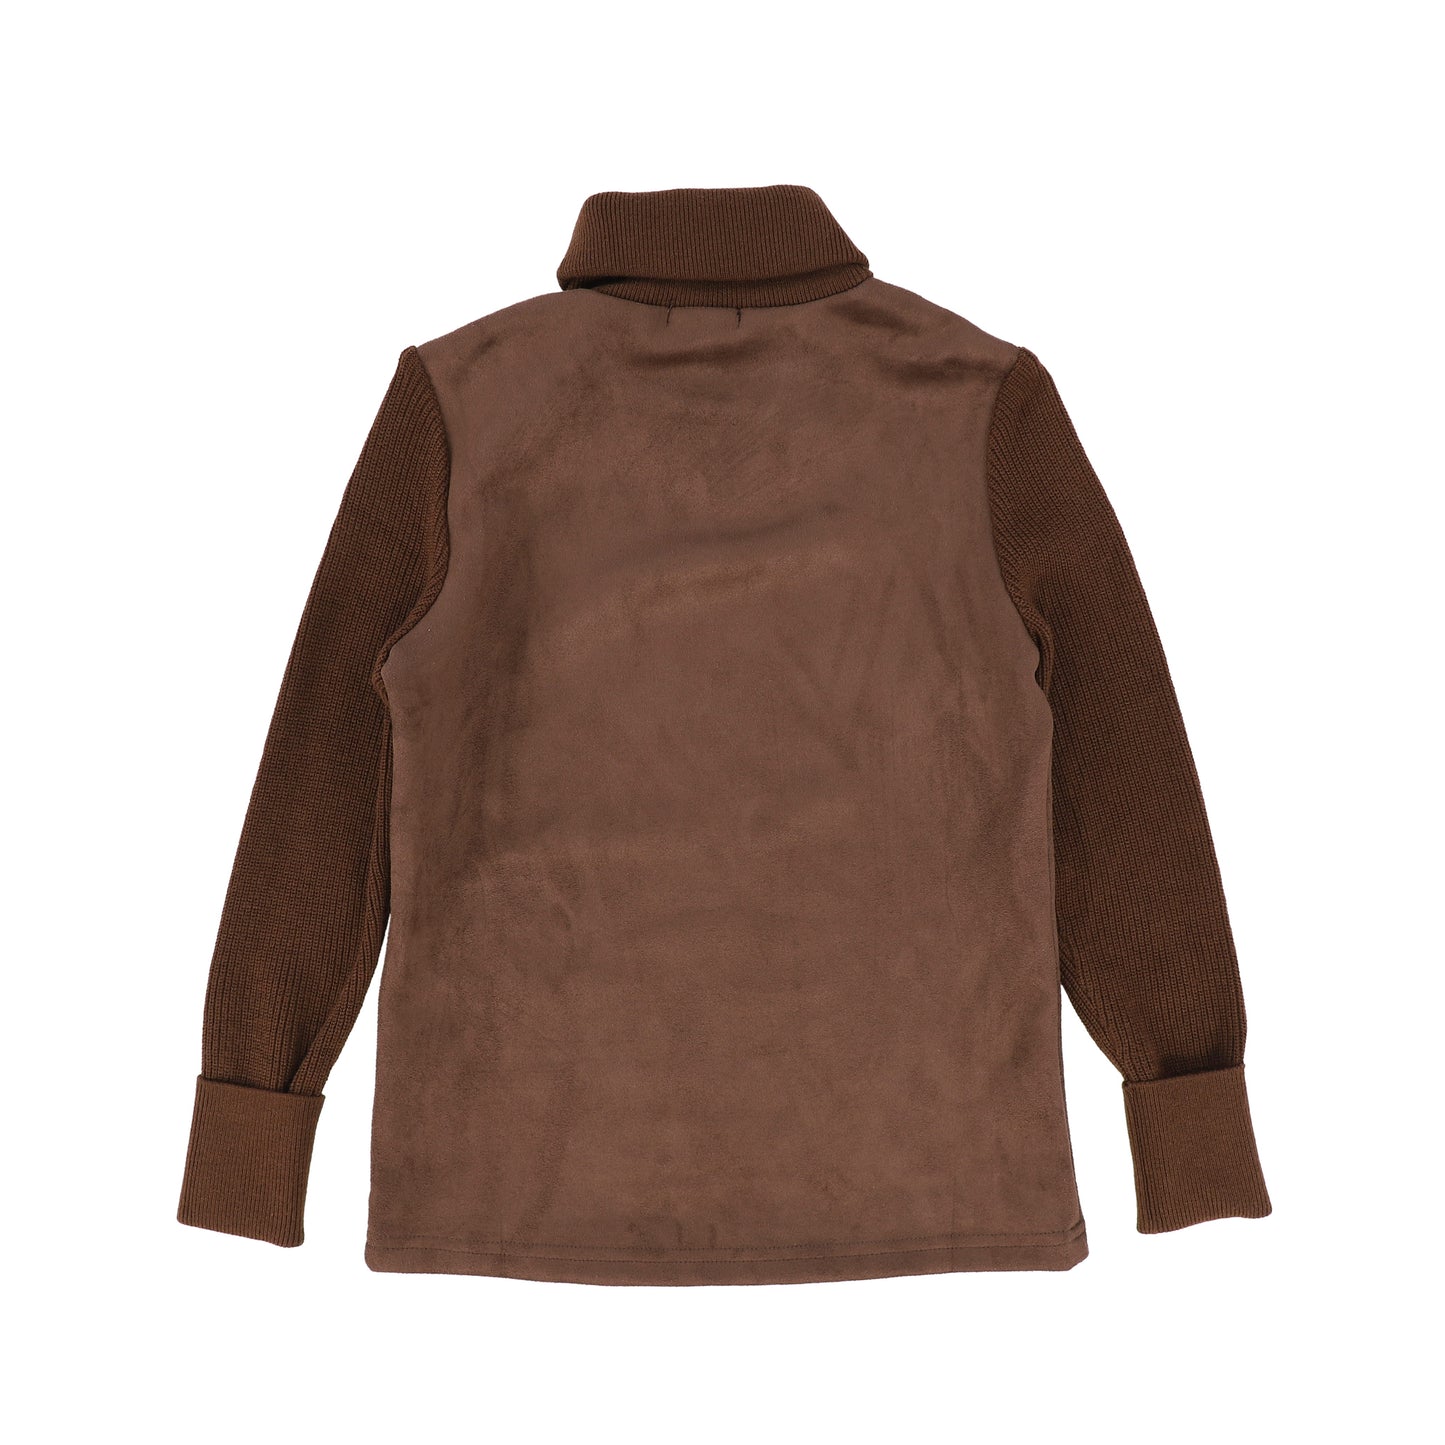 BAMBOO BROWN SUEDE KNIT SLEEVE TURTLENECK [Final Sale]